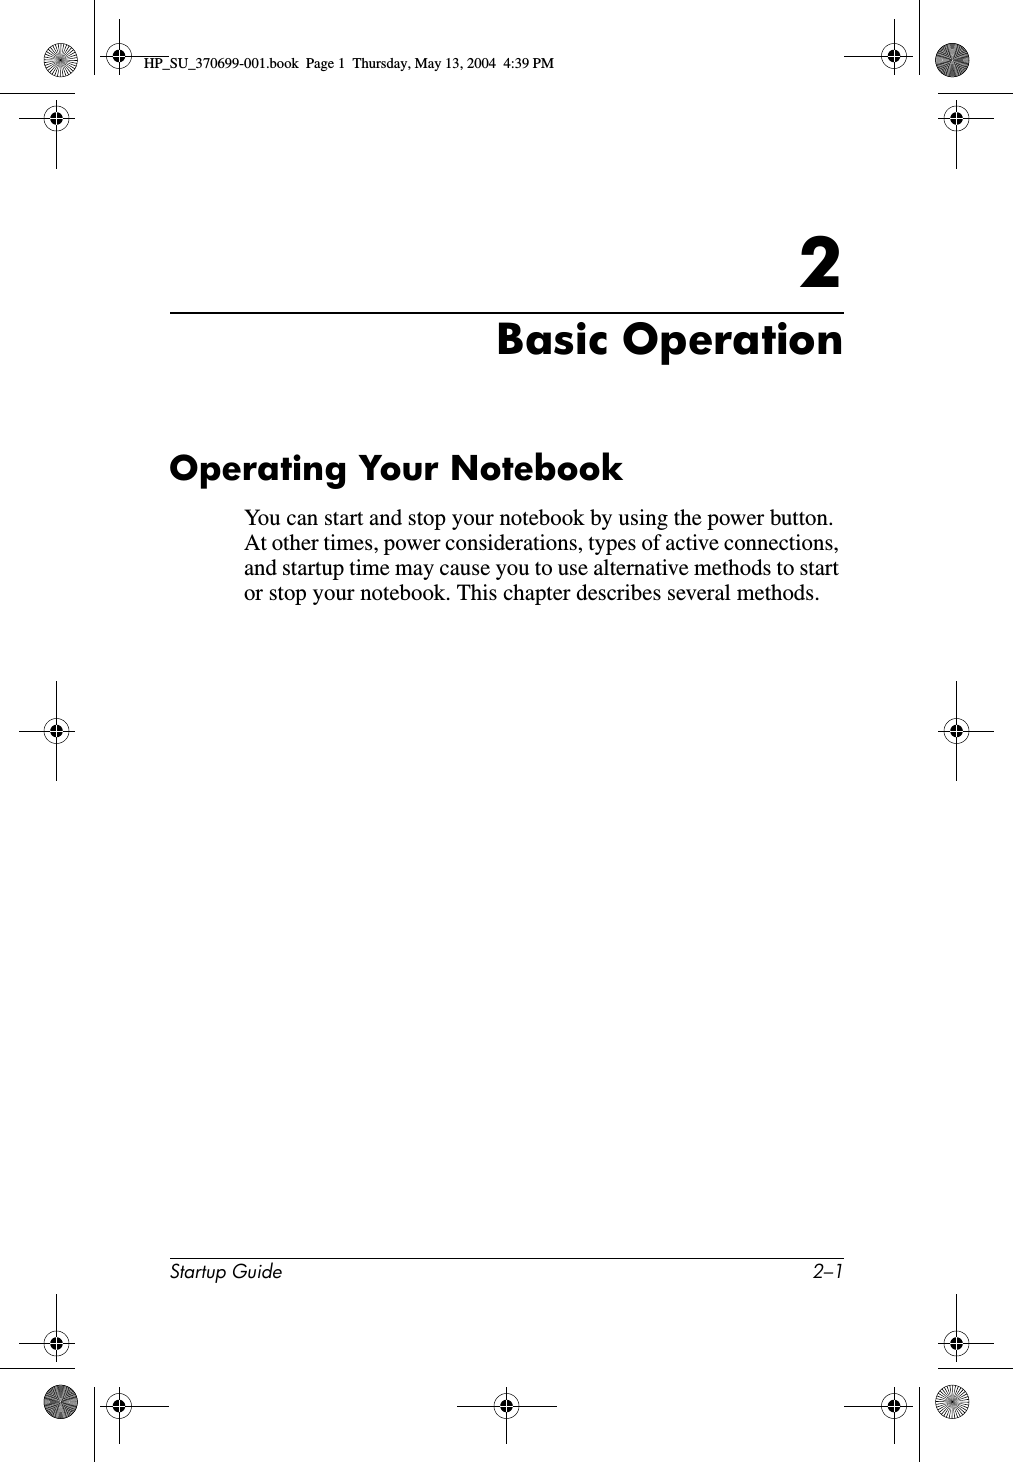 Startup Guide 2–12Basic OperationOperating Your NotebookYou can start and stop your notebook by using the power button. At other times, power considerations, types of active connections, and startup time may cause you to use alternative methods to start or stop your notebook. This chapter describes several methods.HP_SU_370699-001.book  Page 1  Thursday, May 13, 2004  4:39 PM